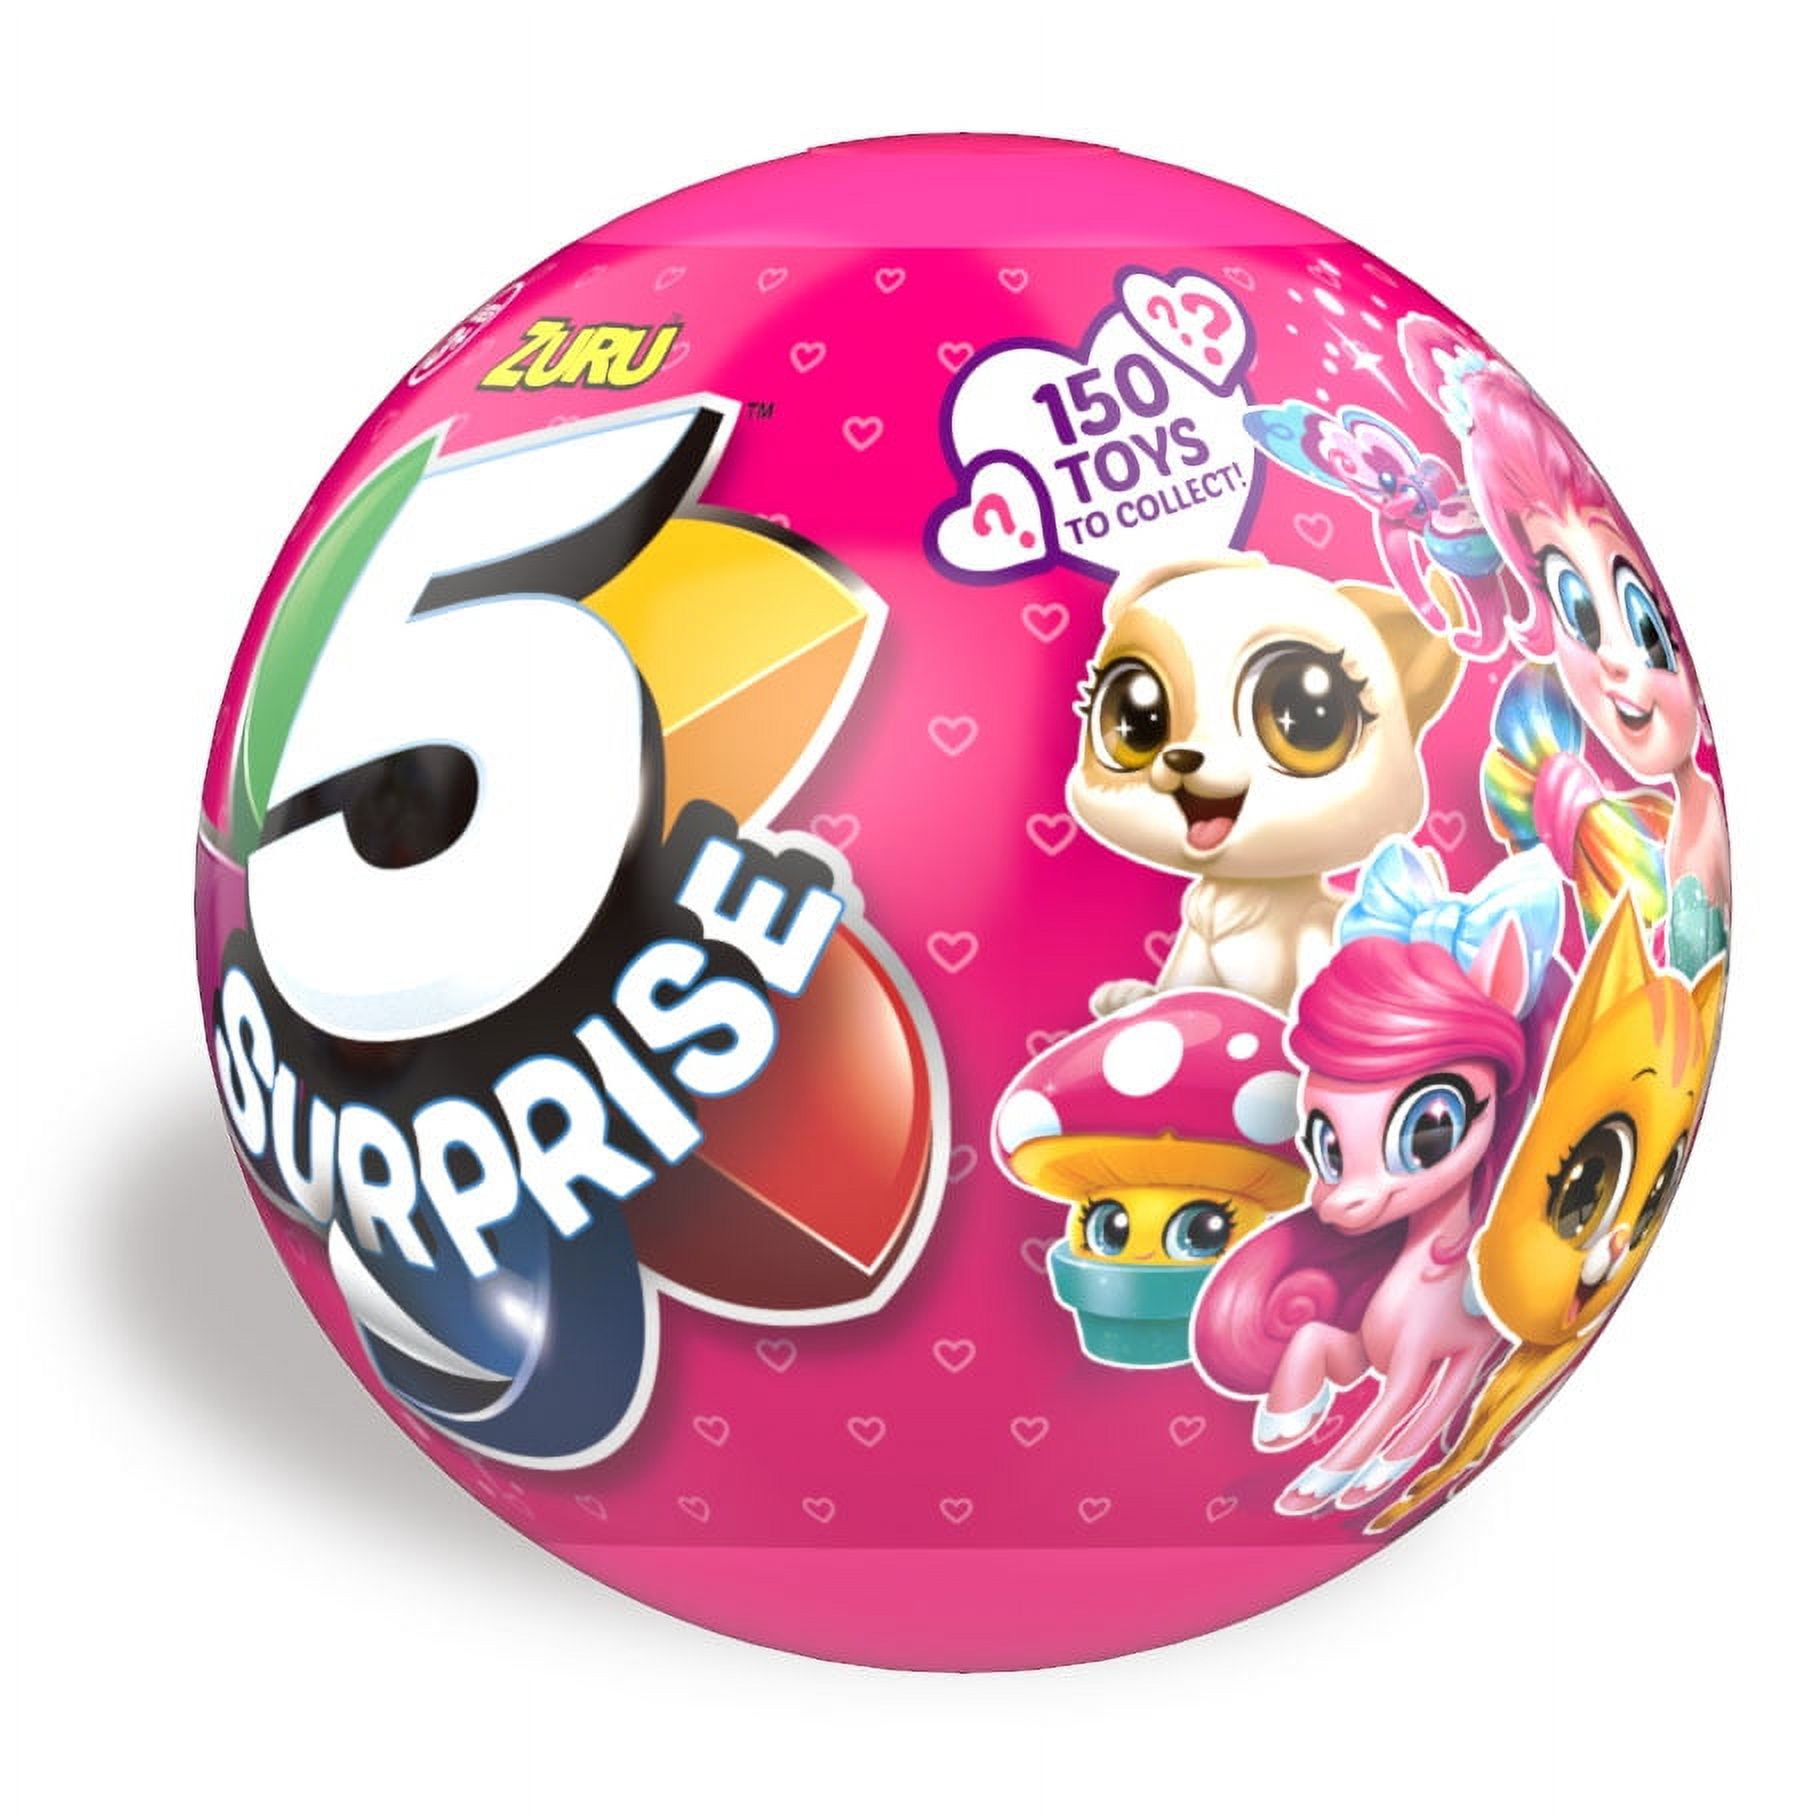 Collectibles Get a Stylish Upgrade With ZURU's 5 Surprise Mini Fashion  Capsules - The Toy Insider